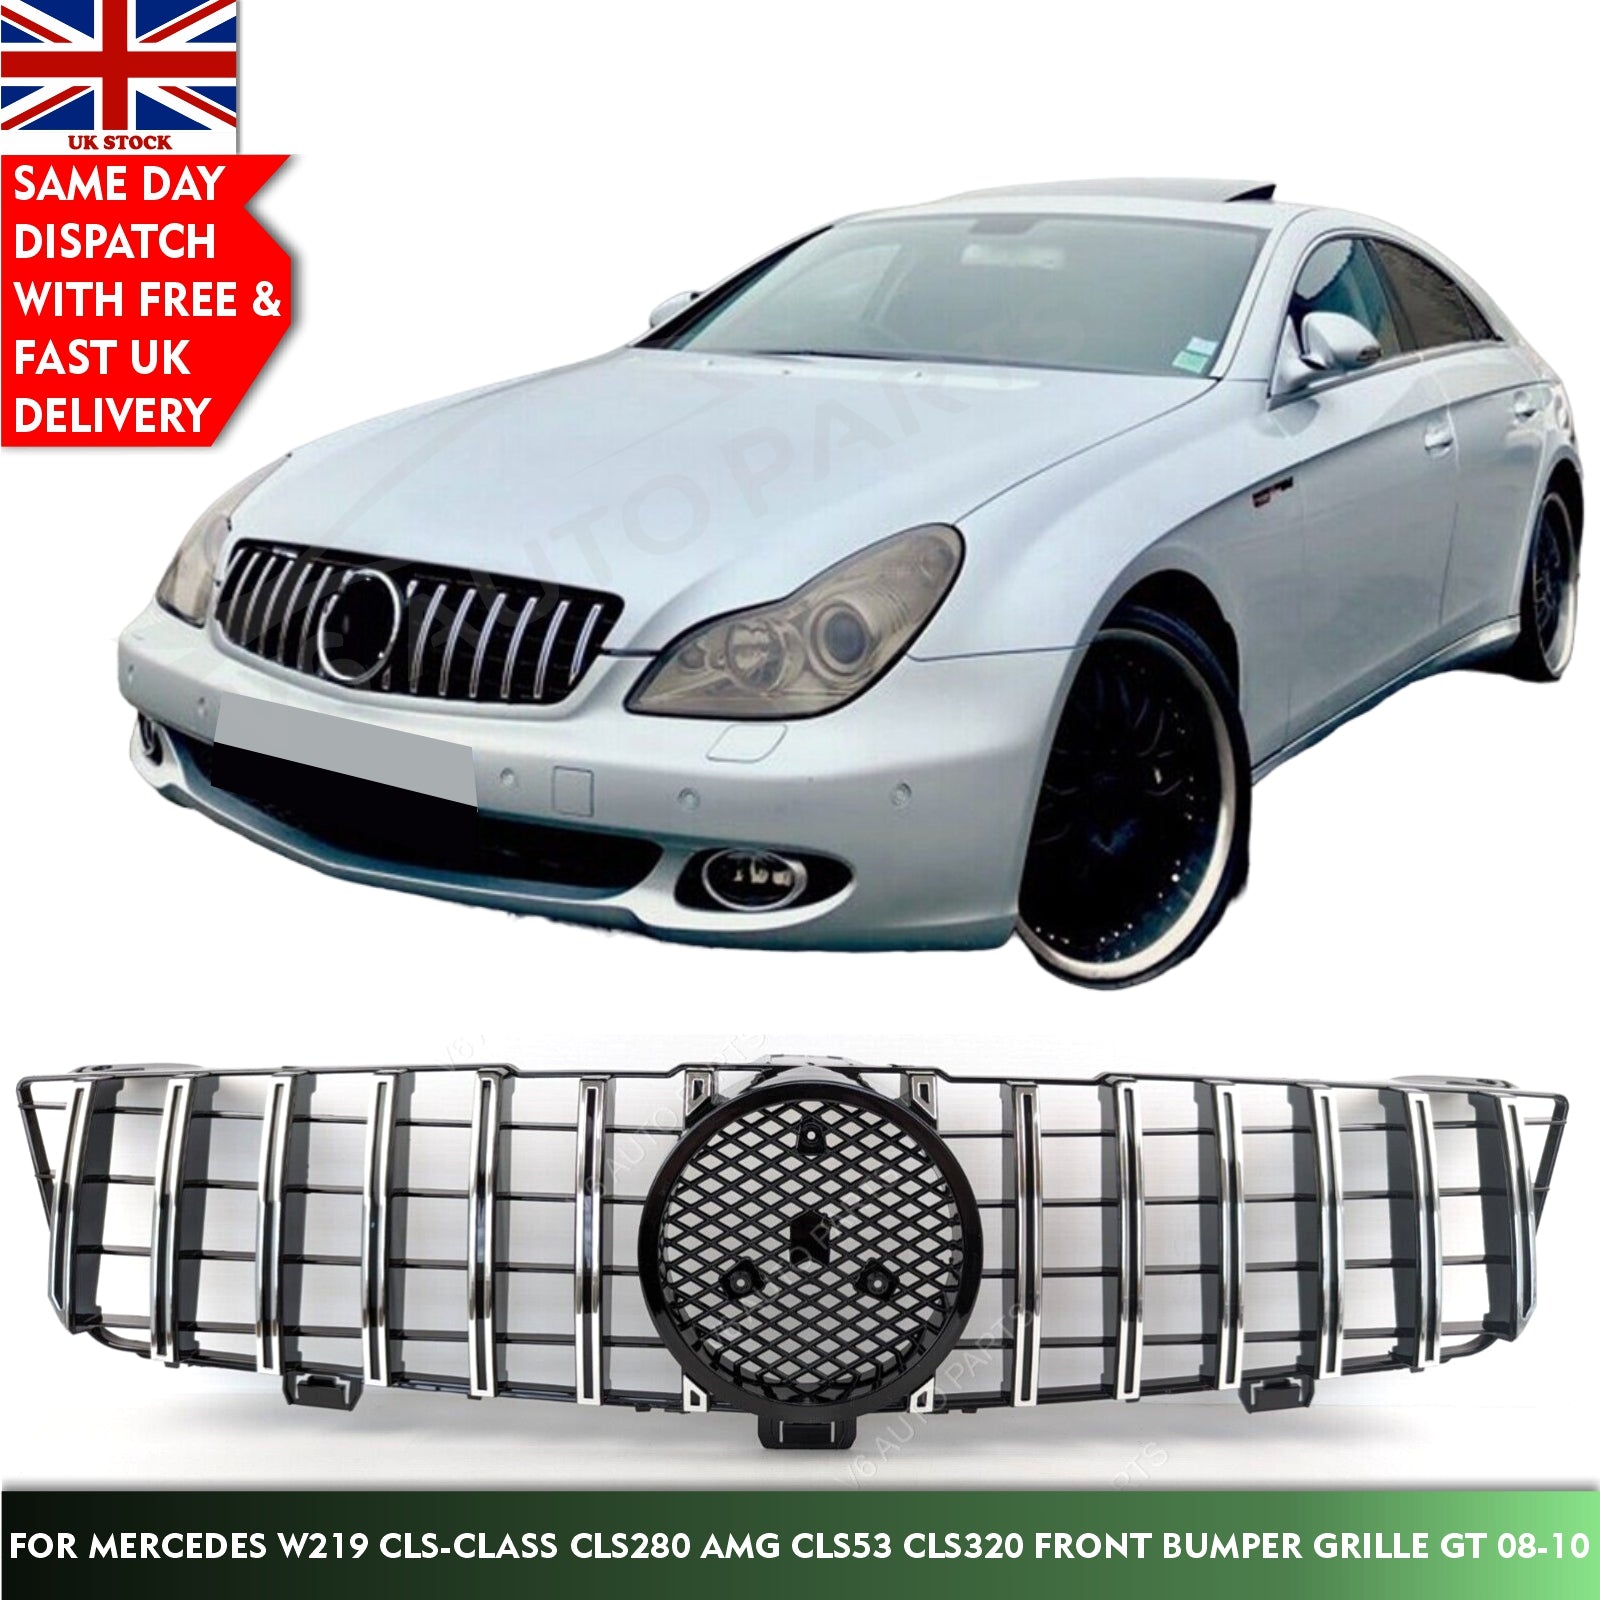 For Mercedes W219 CLS-Class CLS280 AMG CLS53 CLS320 Front Bumper GT 08-10 Grille